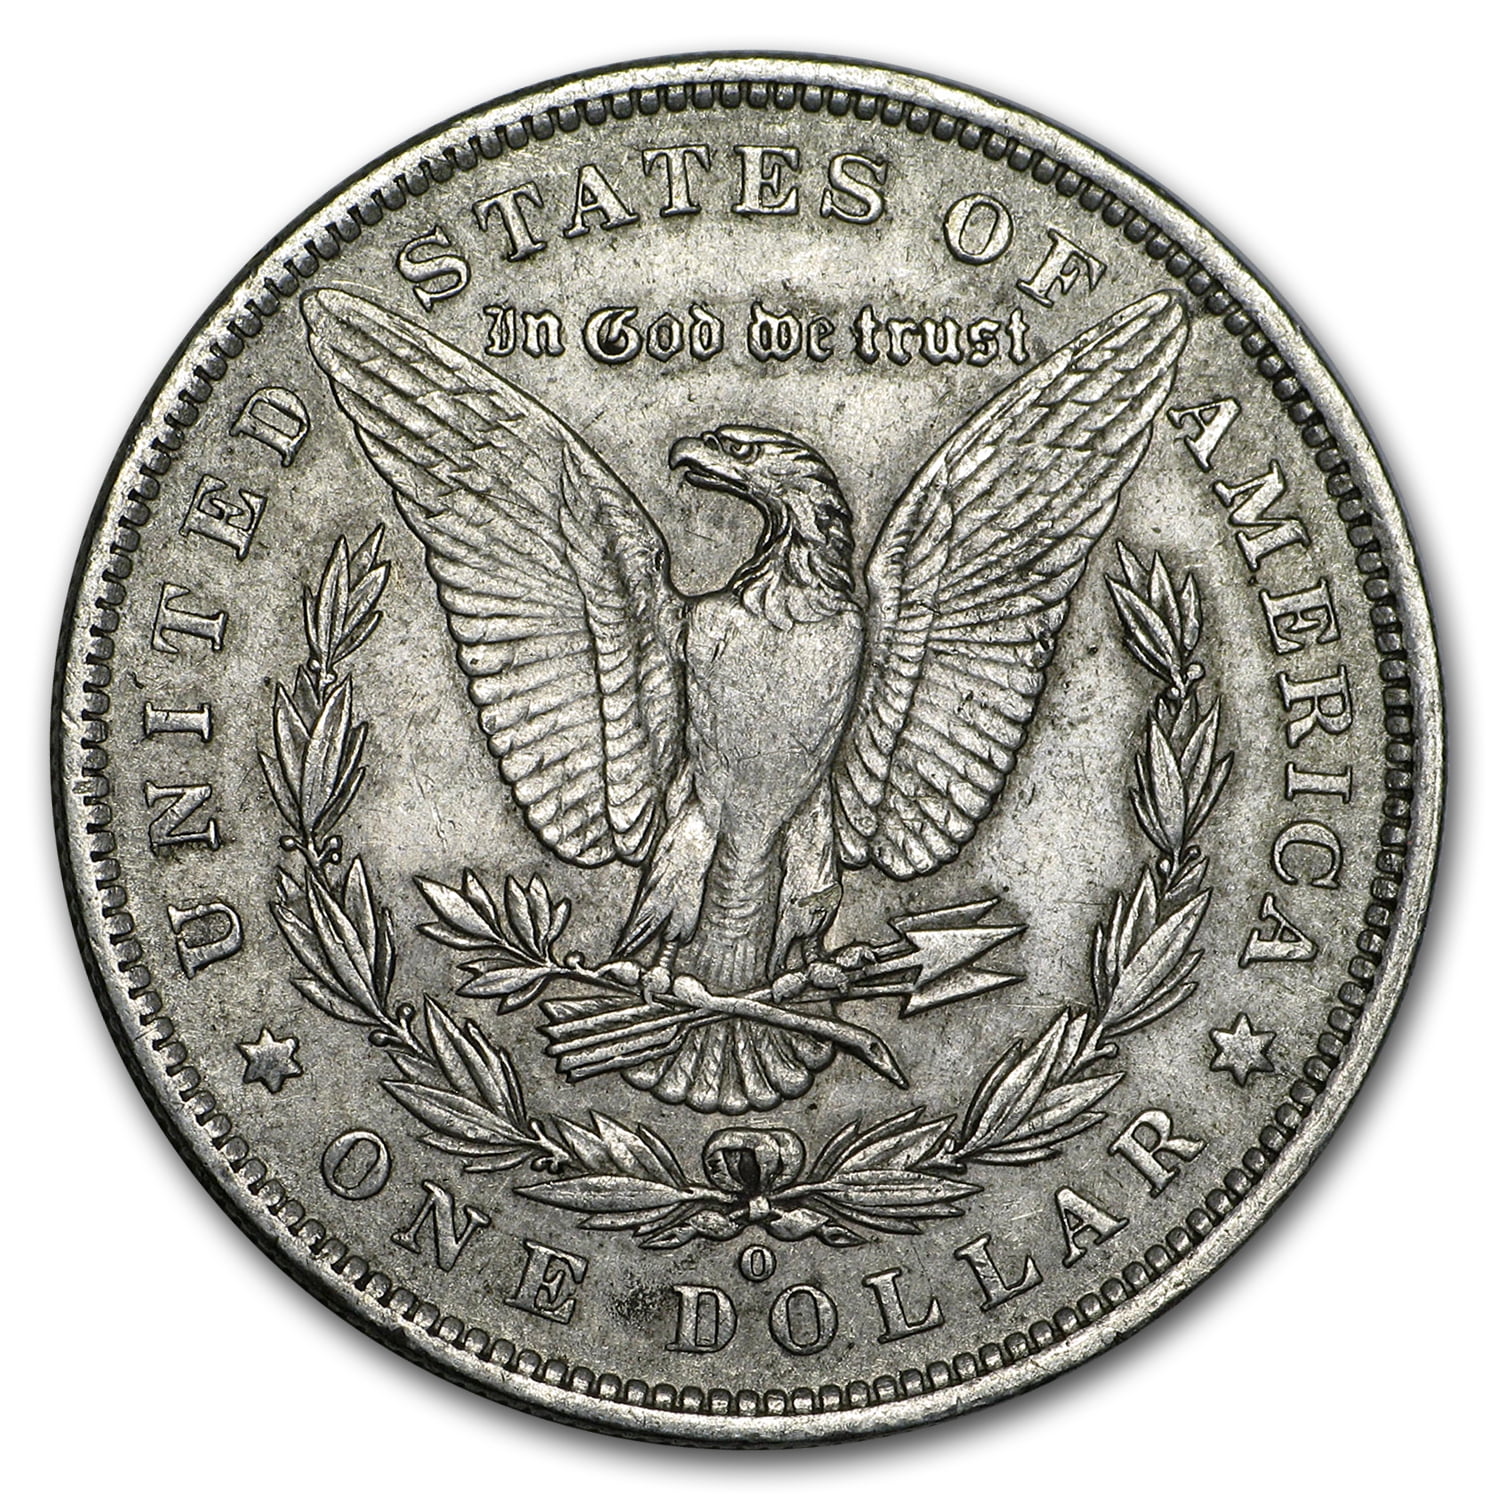 Rare dollar coin sells for $10,400 online - the key date and 'XF